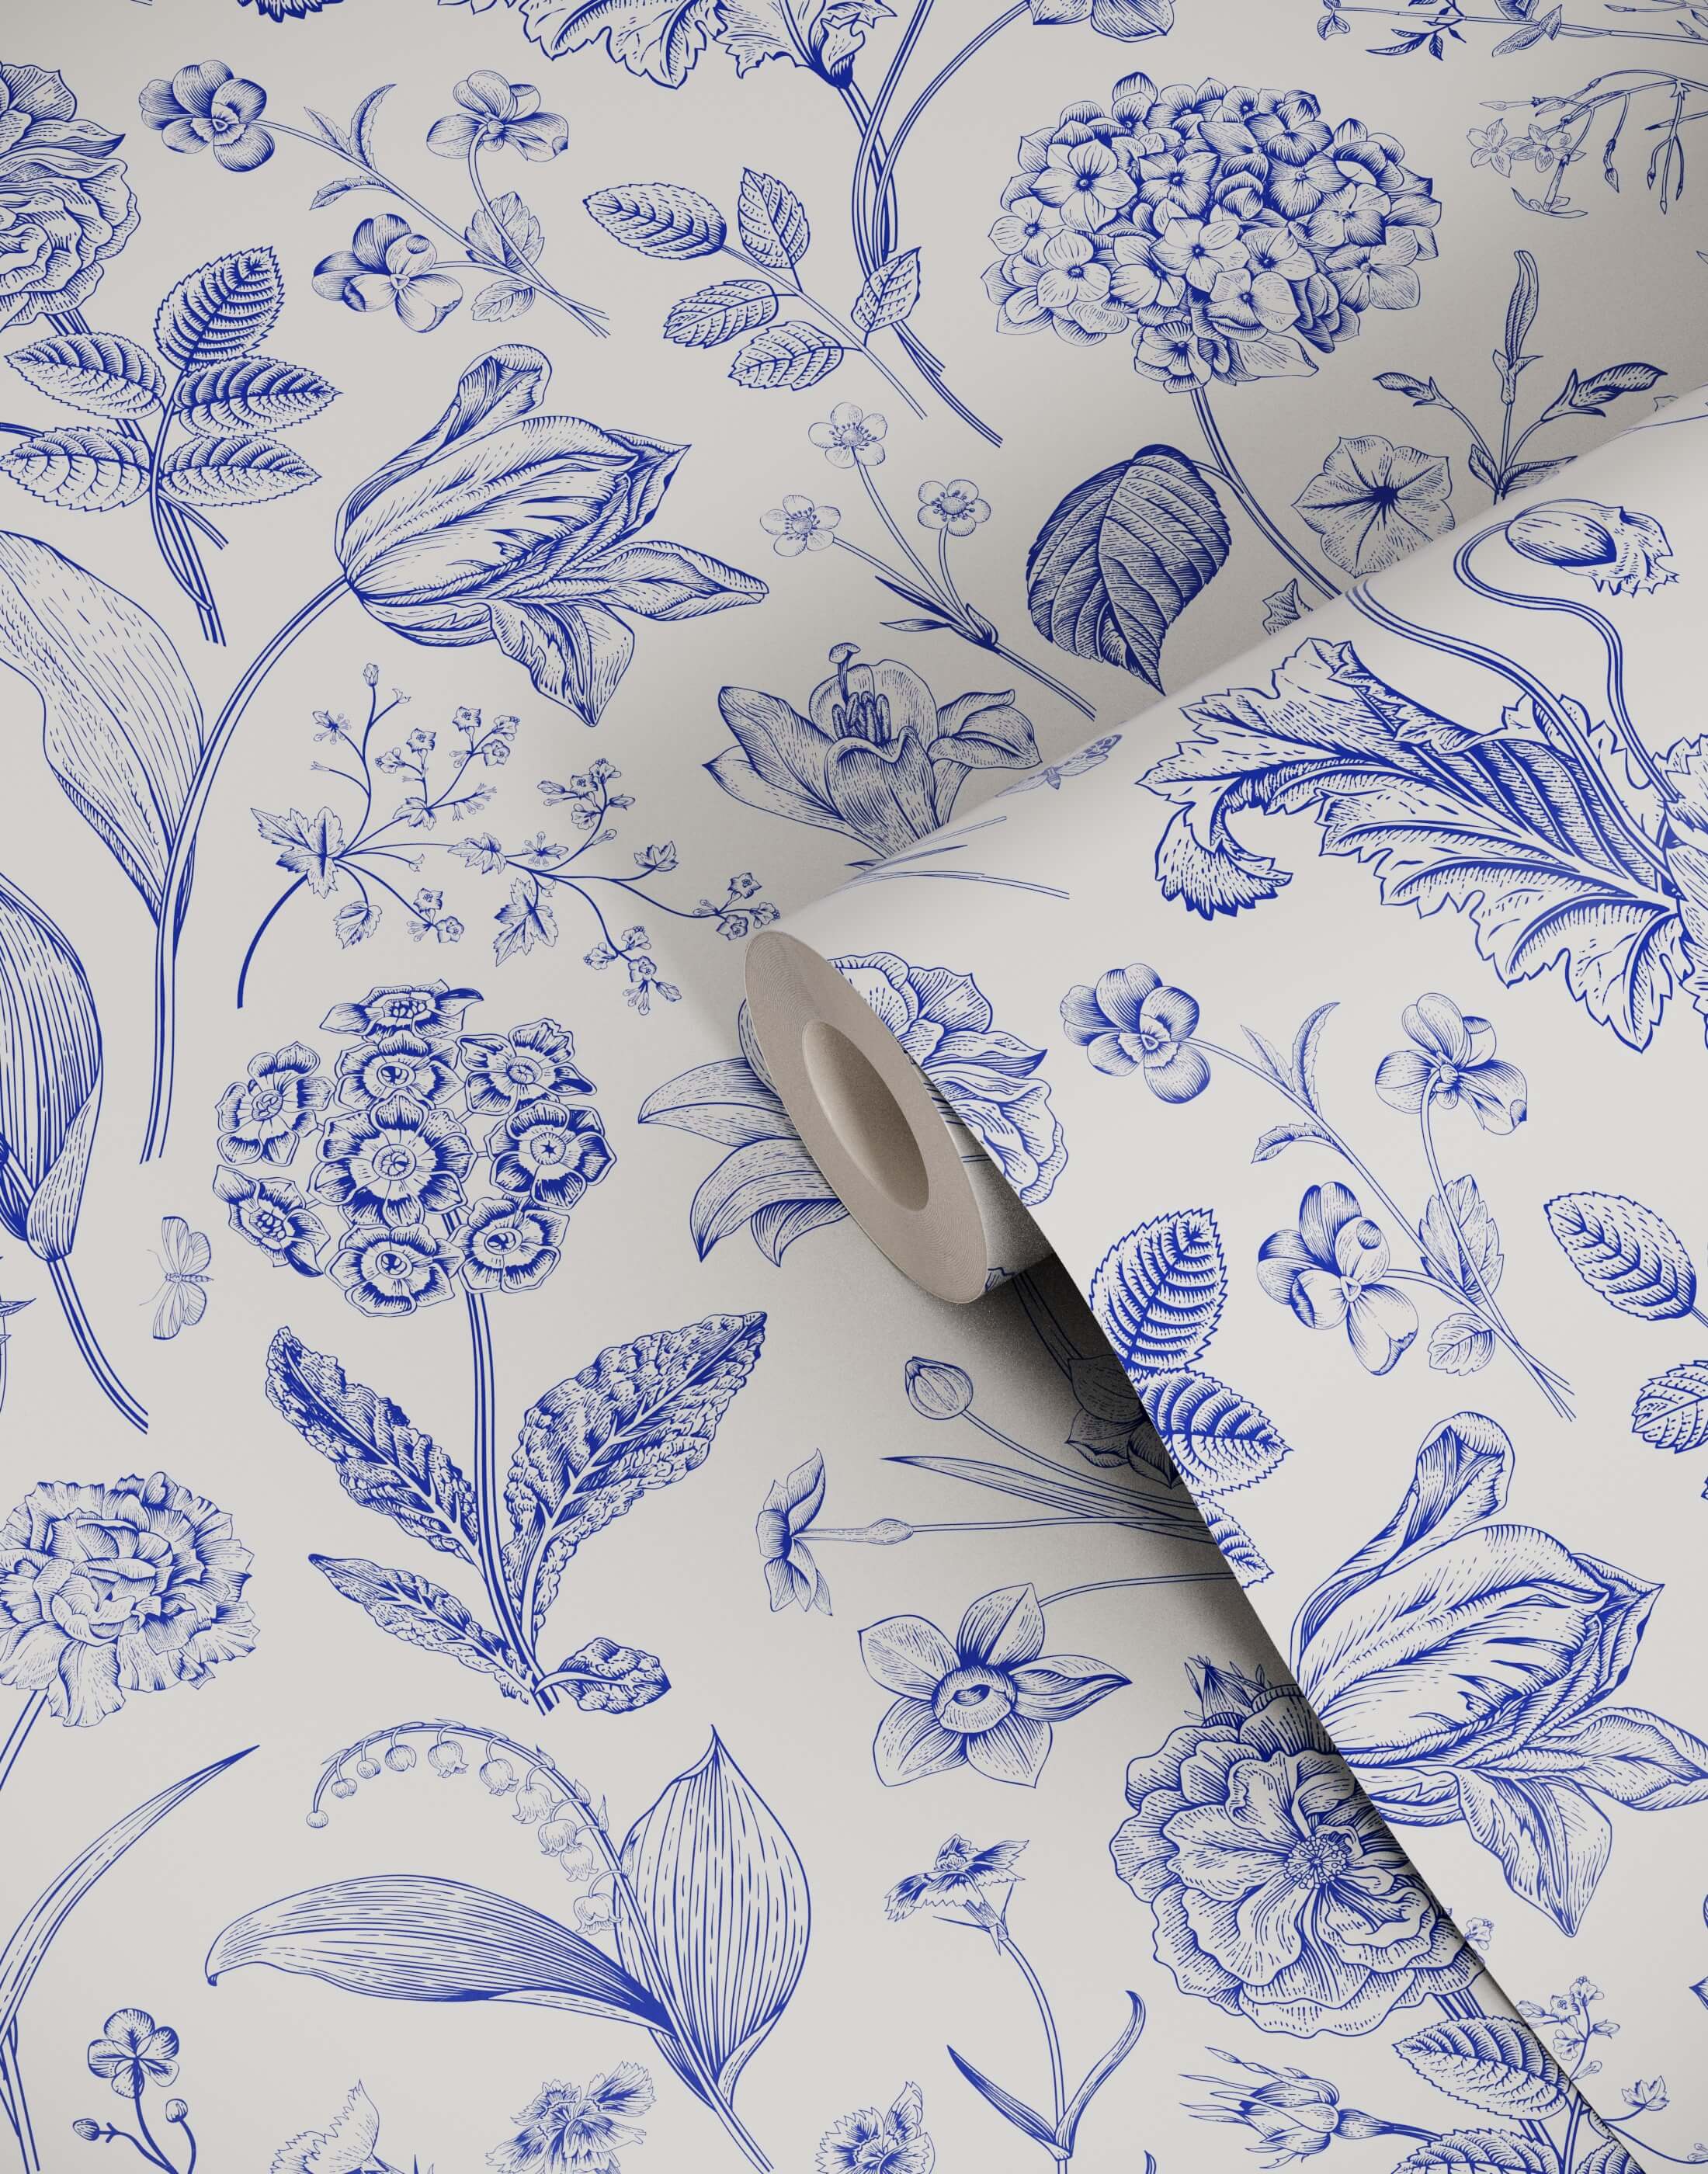 367773 Blue White Floral Wallpaper Seamless Images Stock Photos  Vectors   Shutterstock